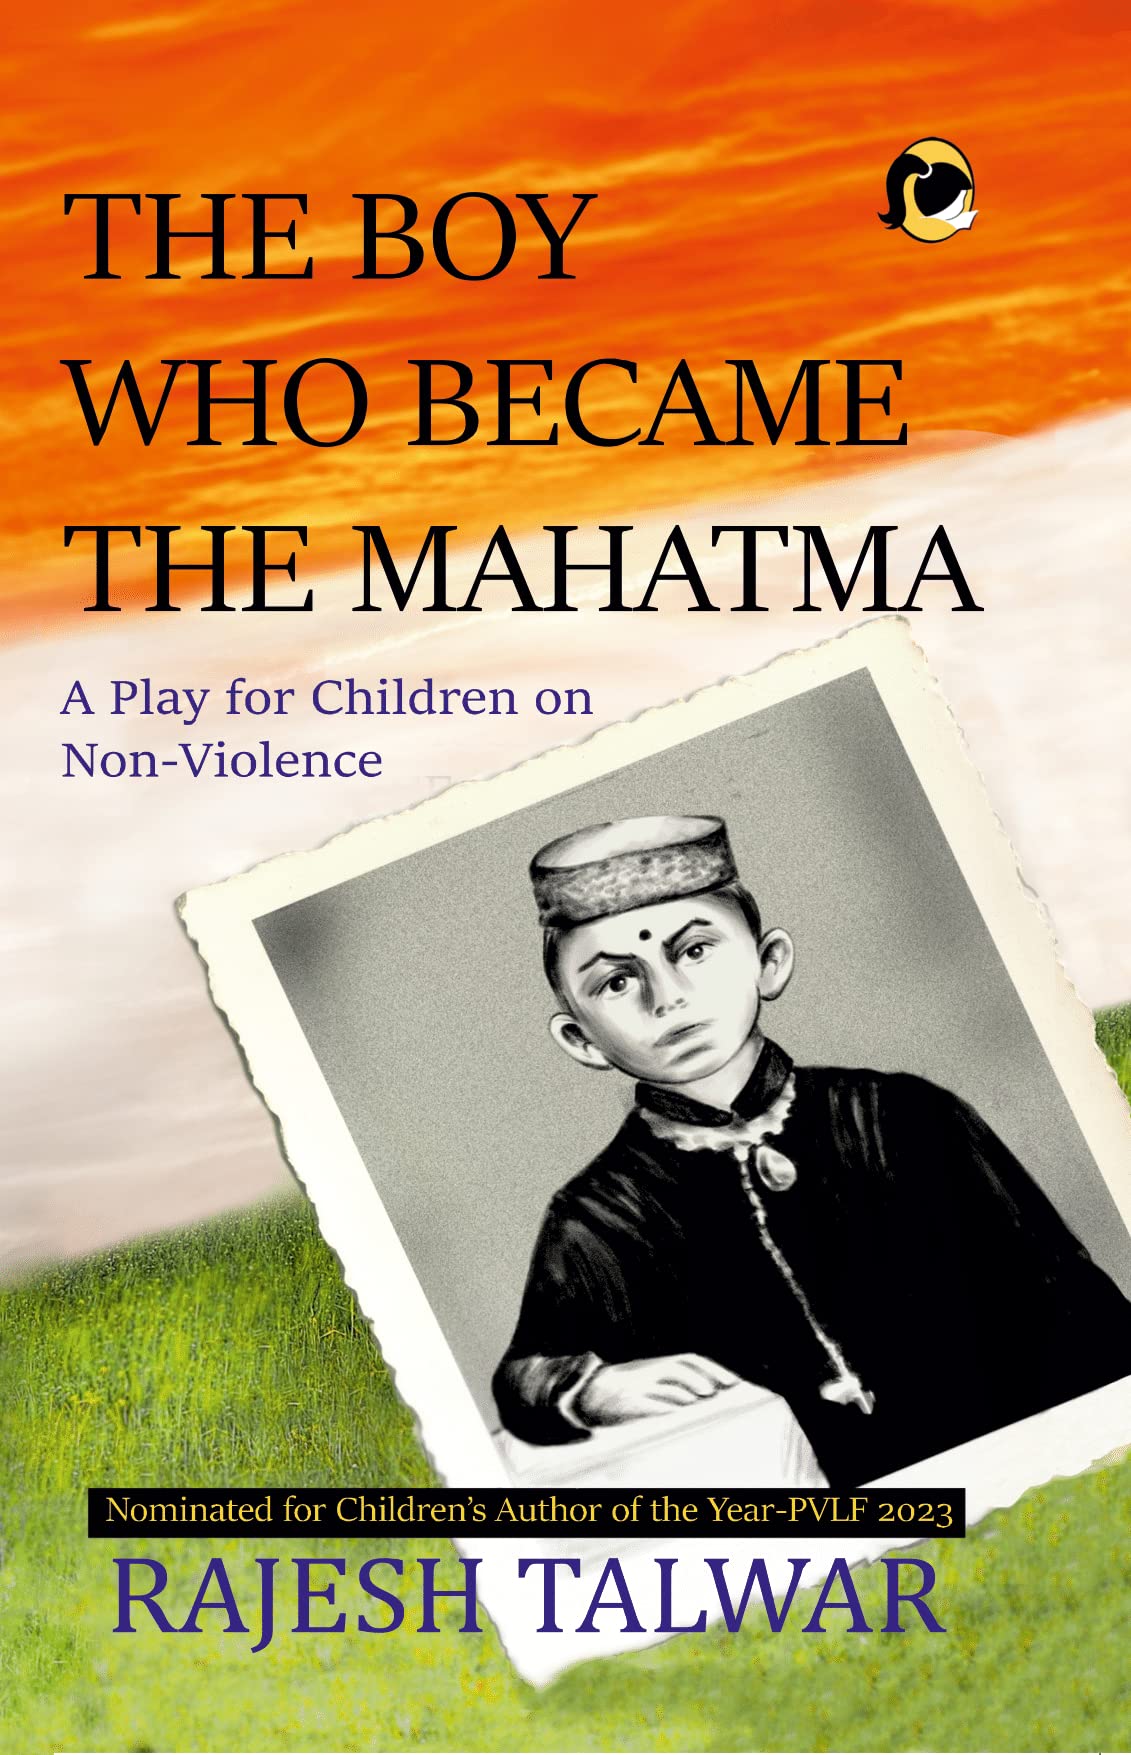 This play for young readers seeks to inform them about the fascinating boyhood years of Mahatma Gandhi